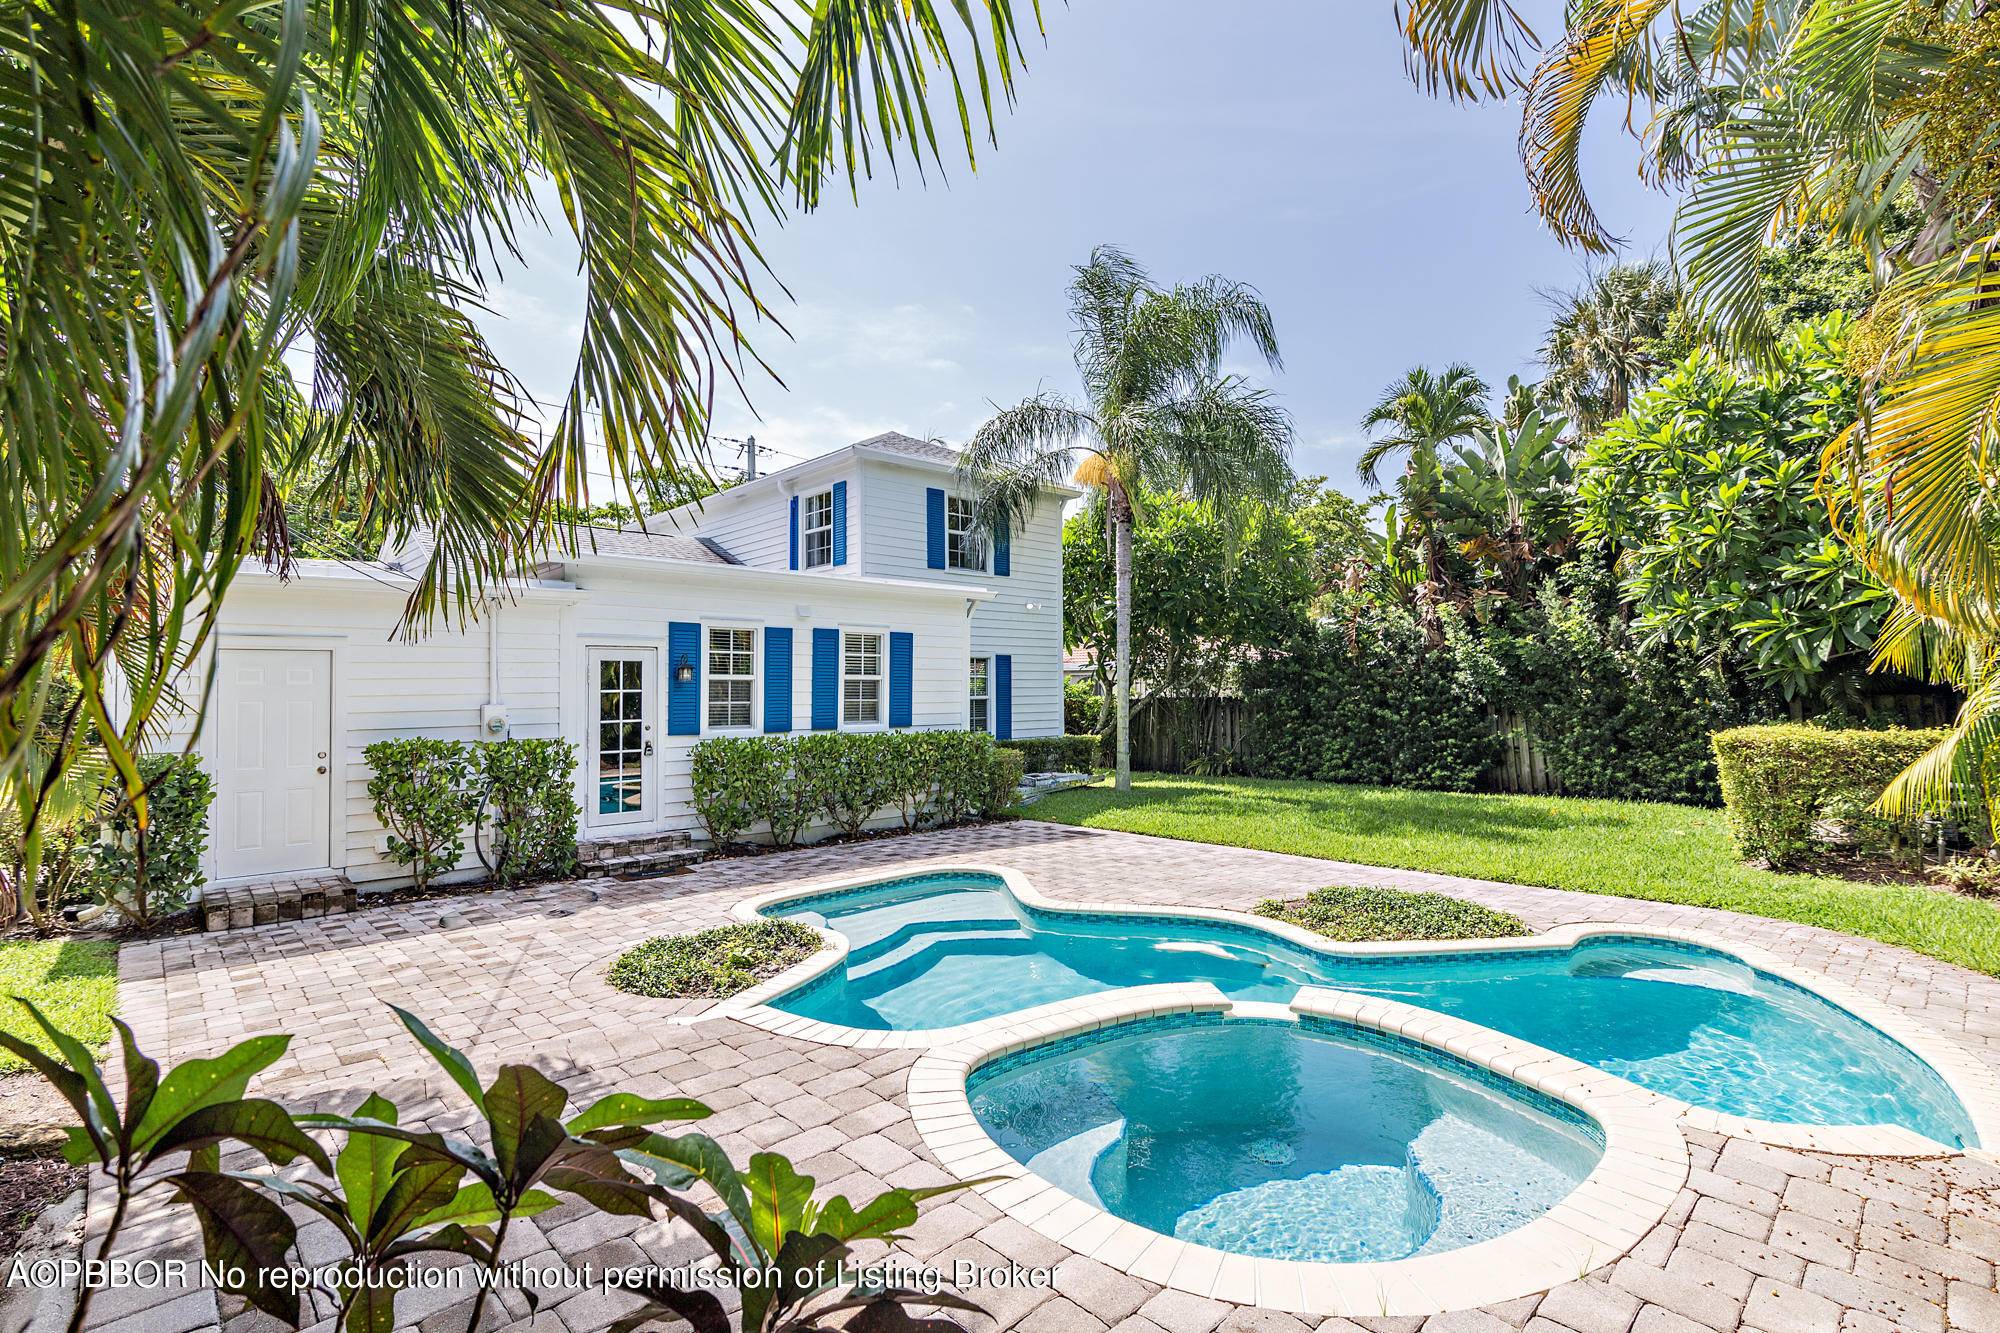 Located in the heart of Historic El Cid, this two story Colonial home offers four bedrooms and three bathrooms with an expansive backyard and heated pool and spa.